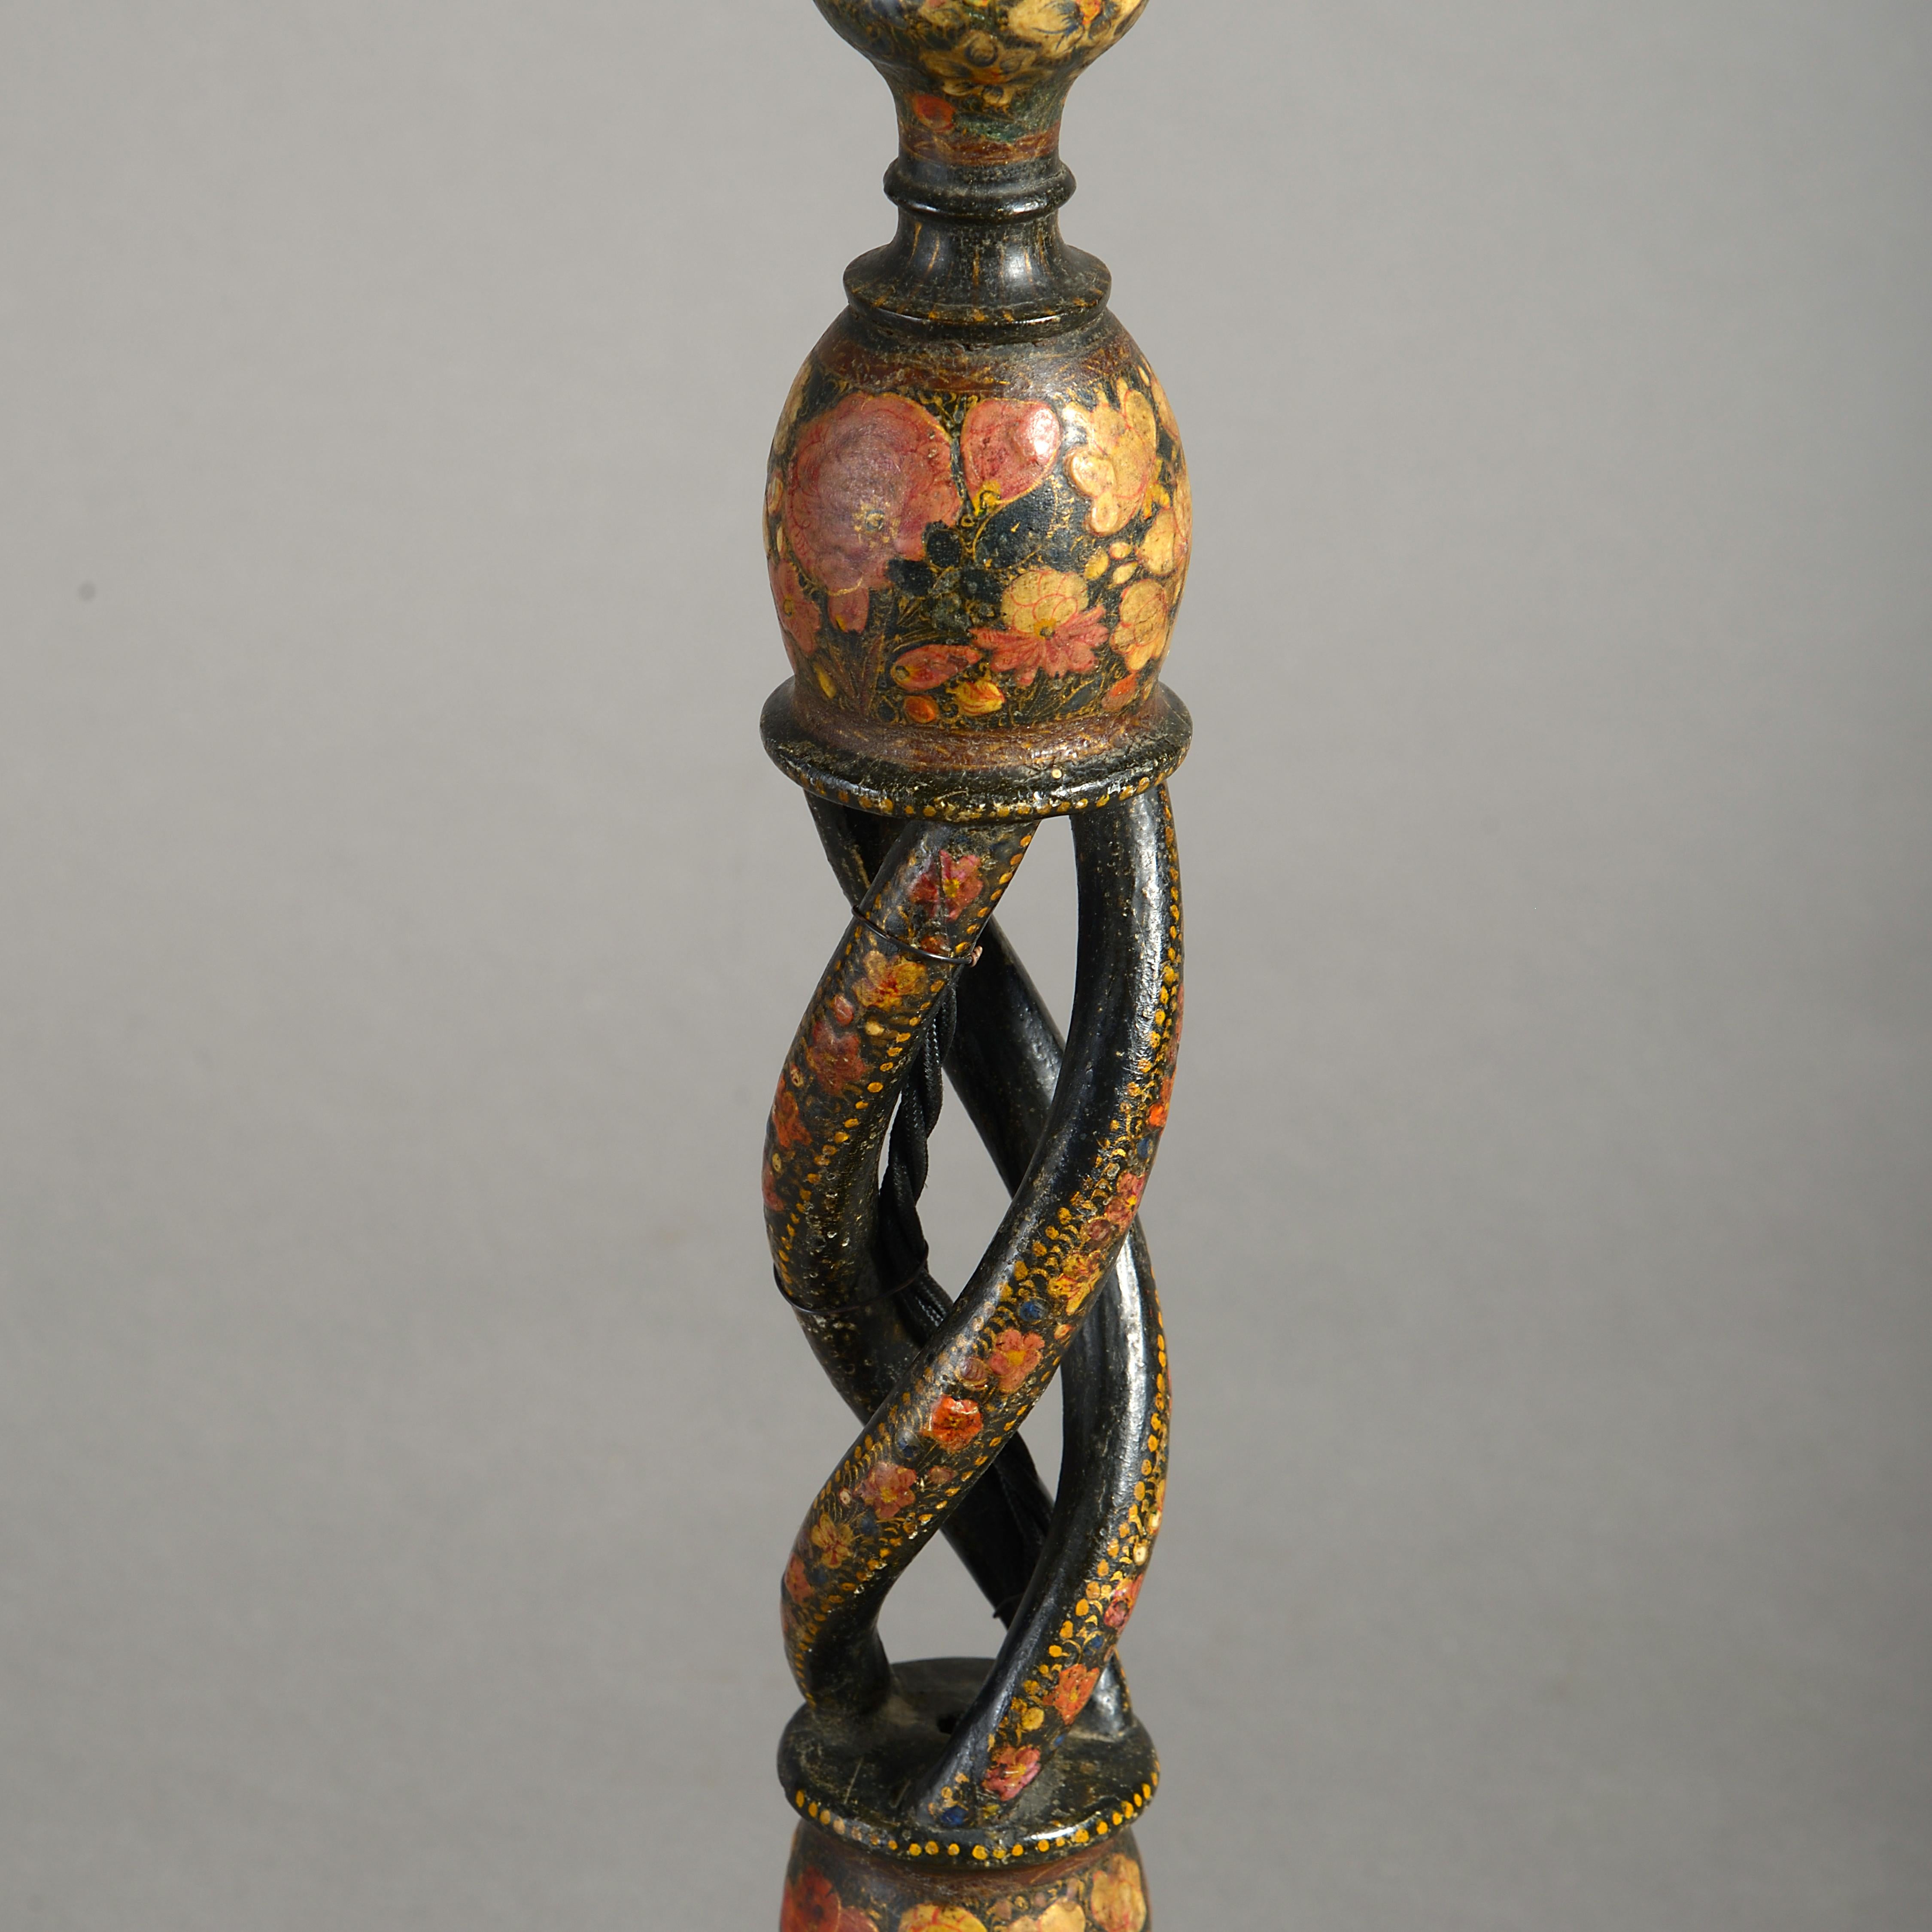 Anglo-Indian Tall Early 20th Century Kashmiri Table Lamp